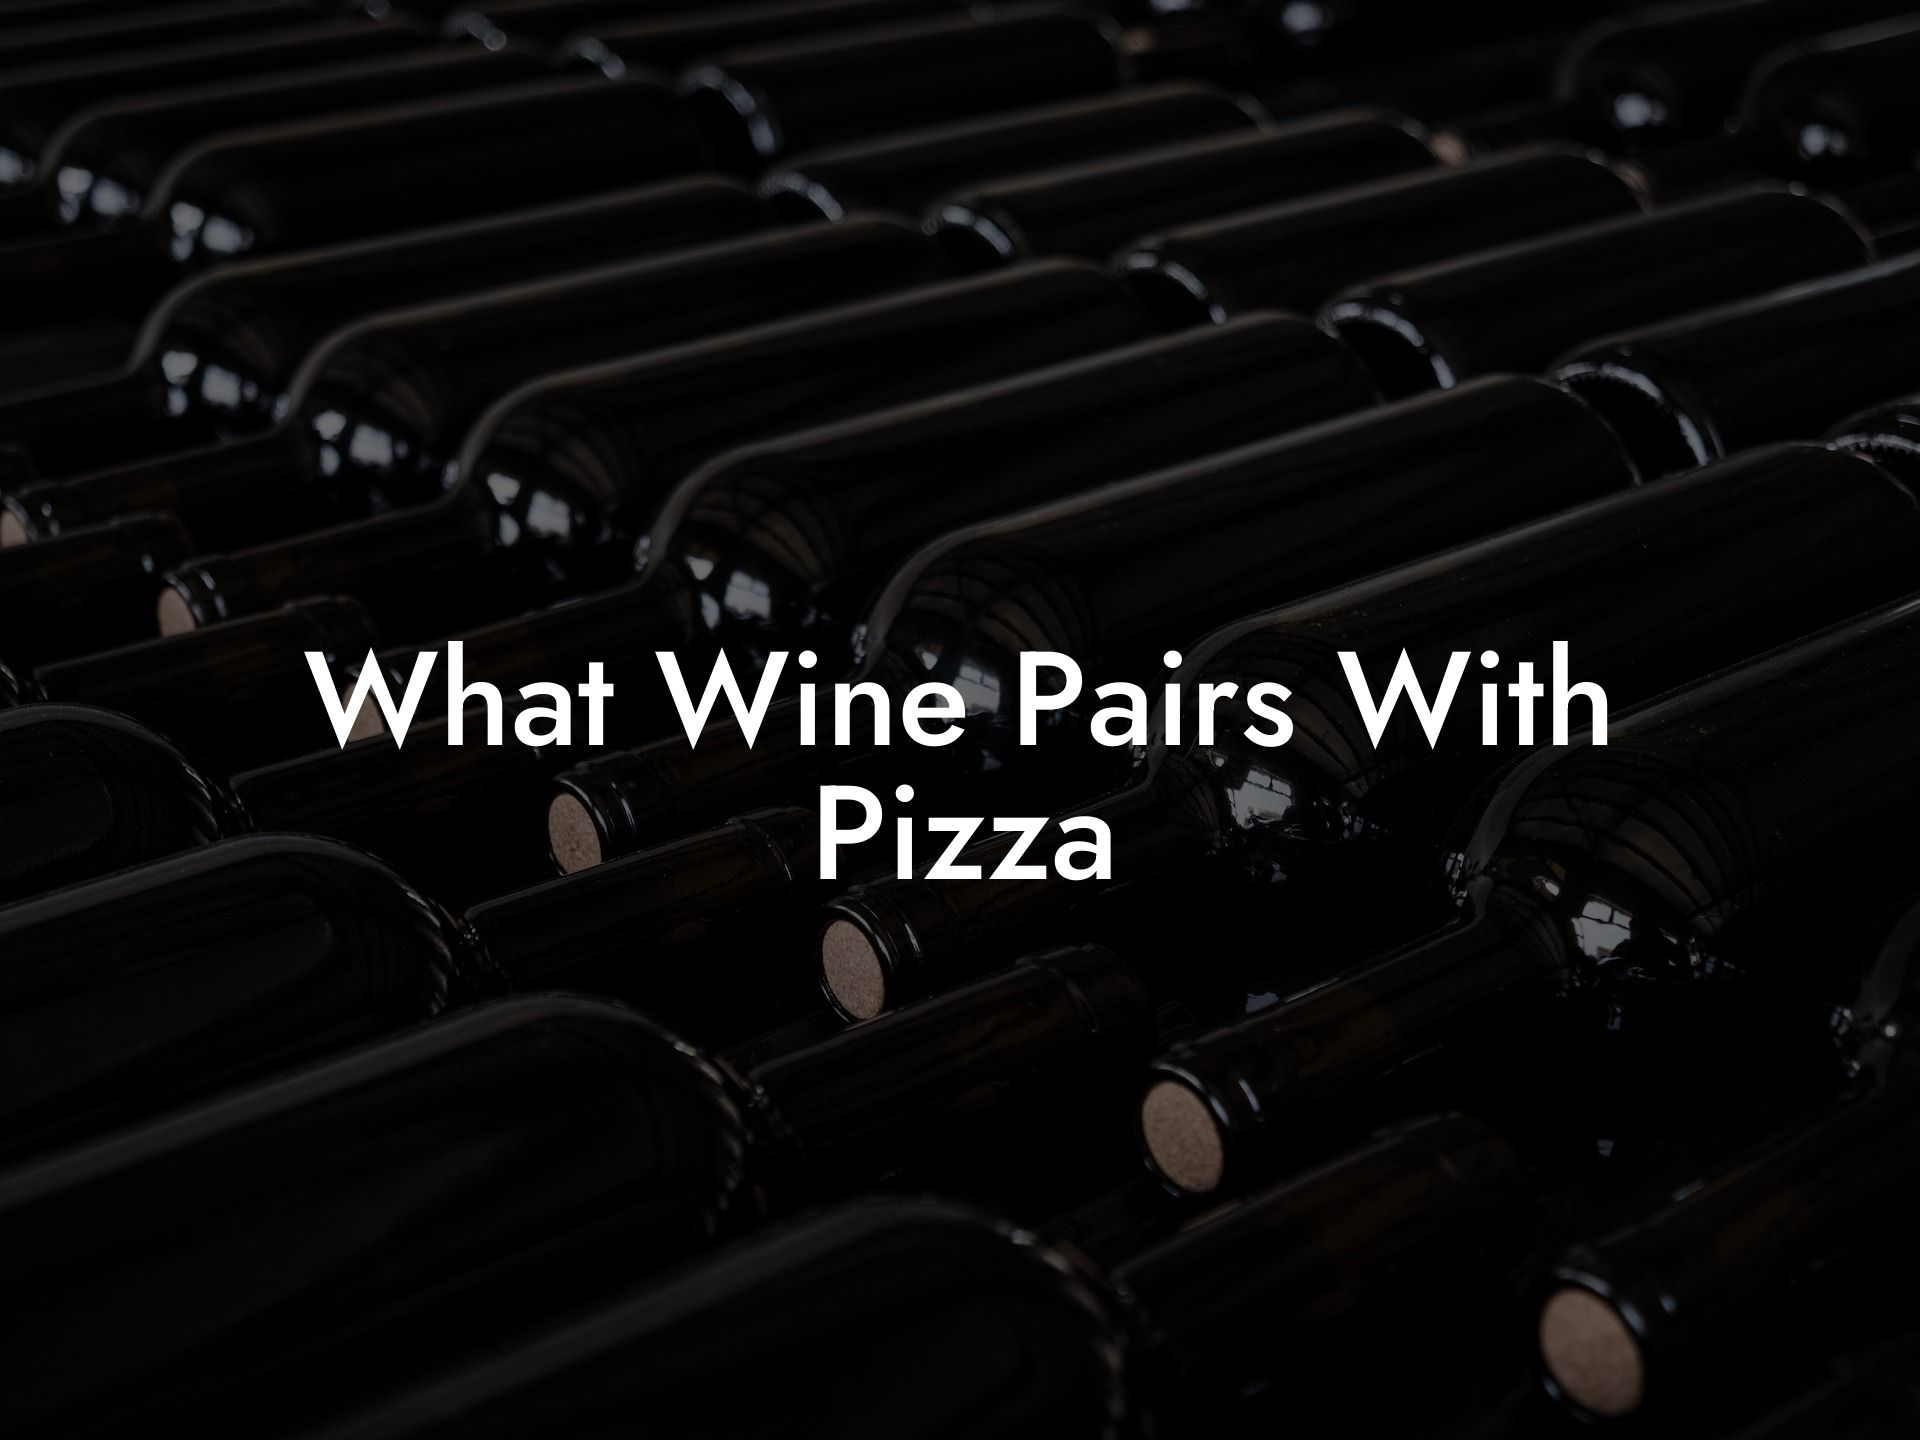 What Wine Pairs With Pizza